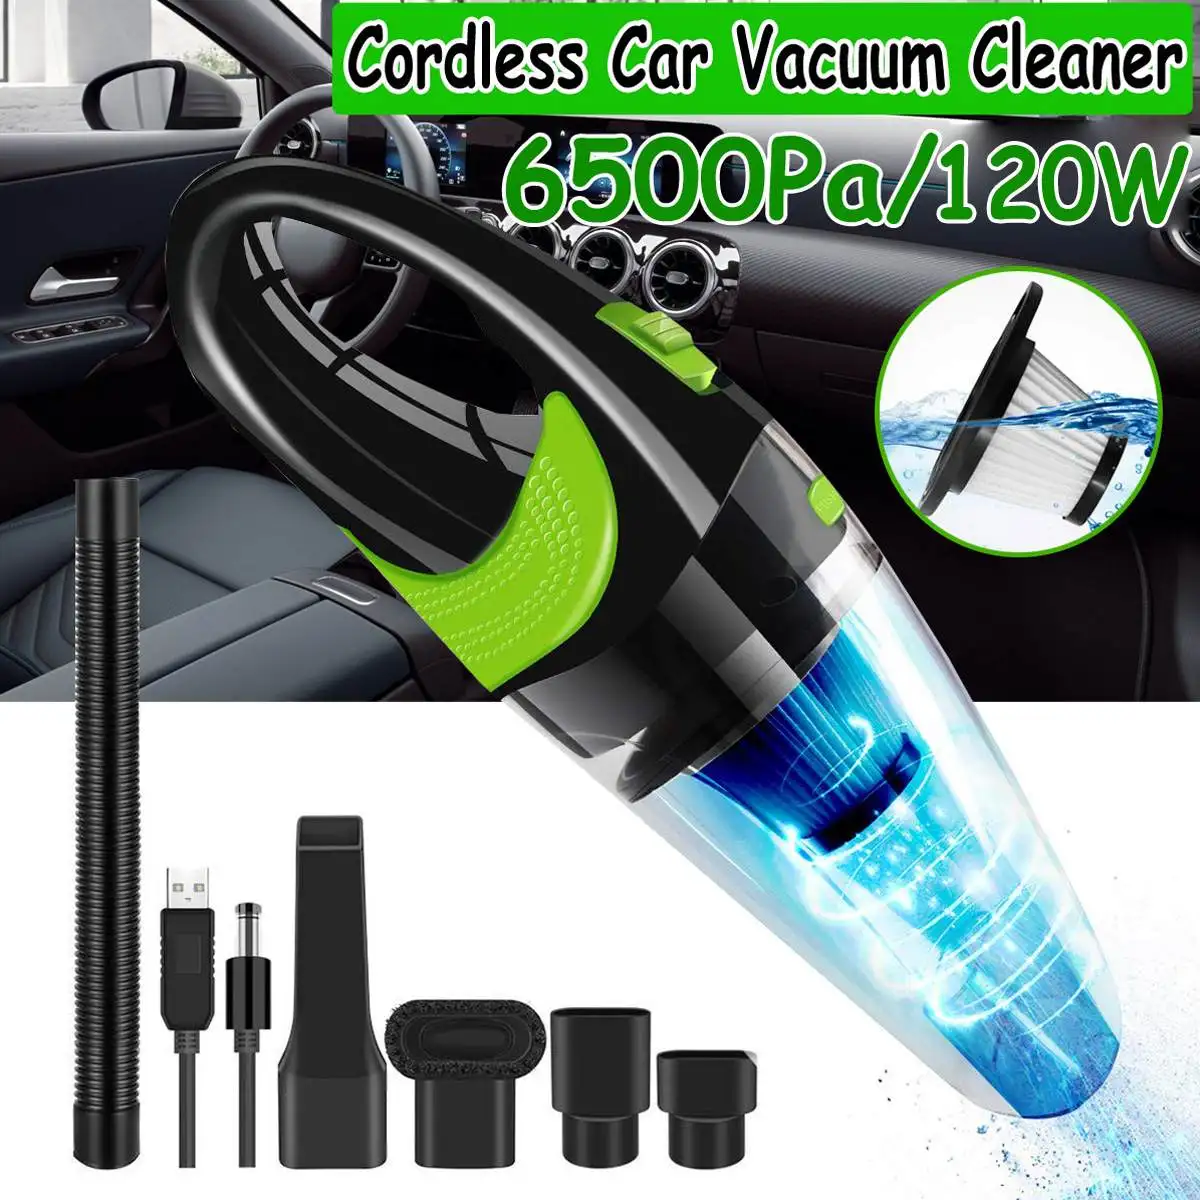 

6500pa Handheld Cordless Car Vacuum Cleaner DC 12V 120W Cordless Wet Dry Dual Use Auto Portable Vacuums Cleaner For home KH35